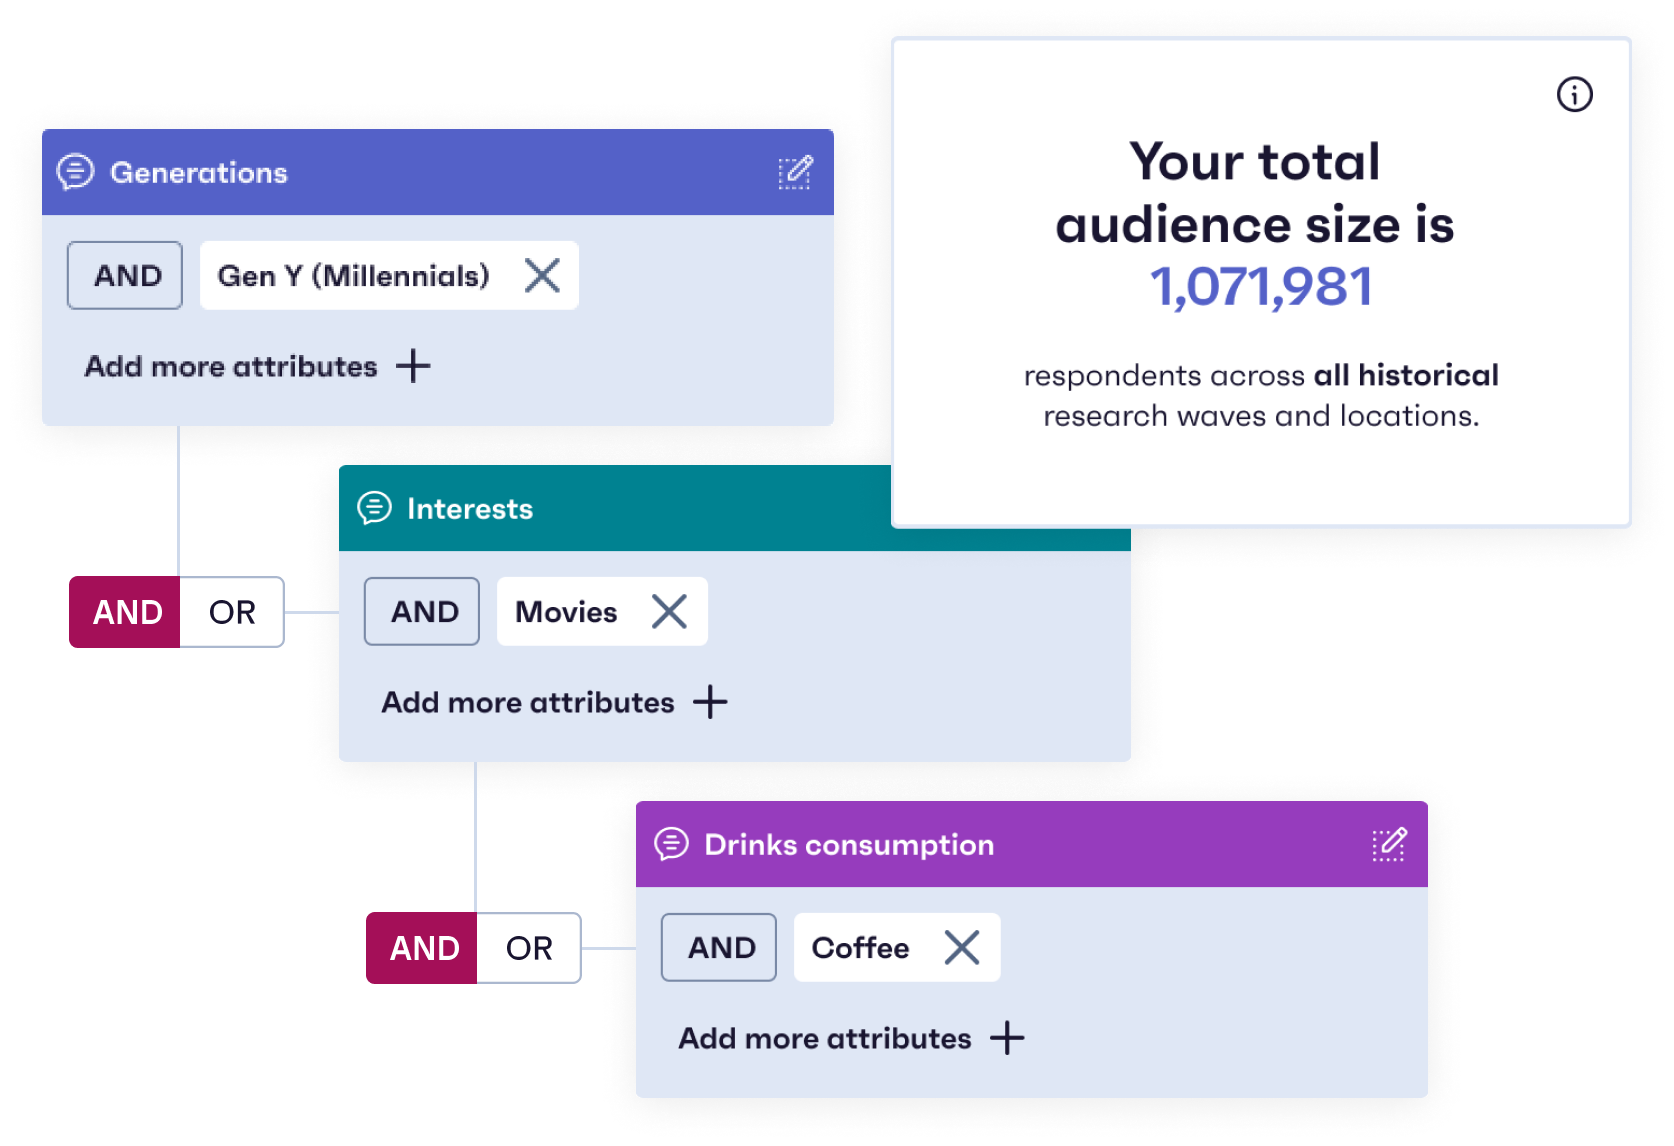 Missing details on that audience? Sorted.